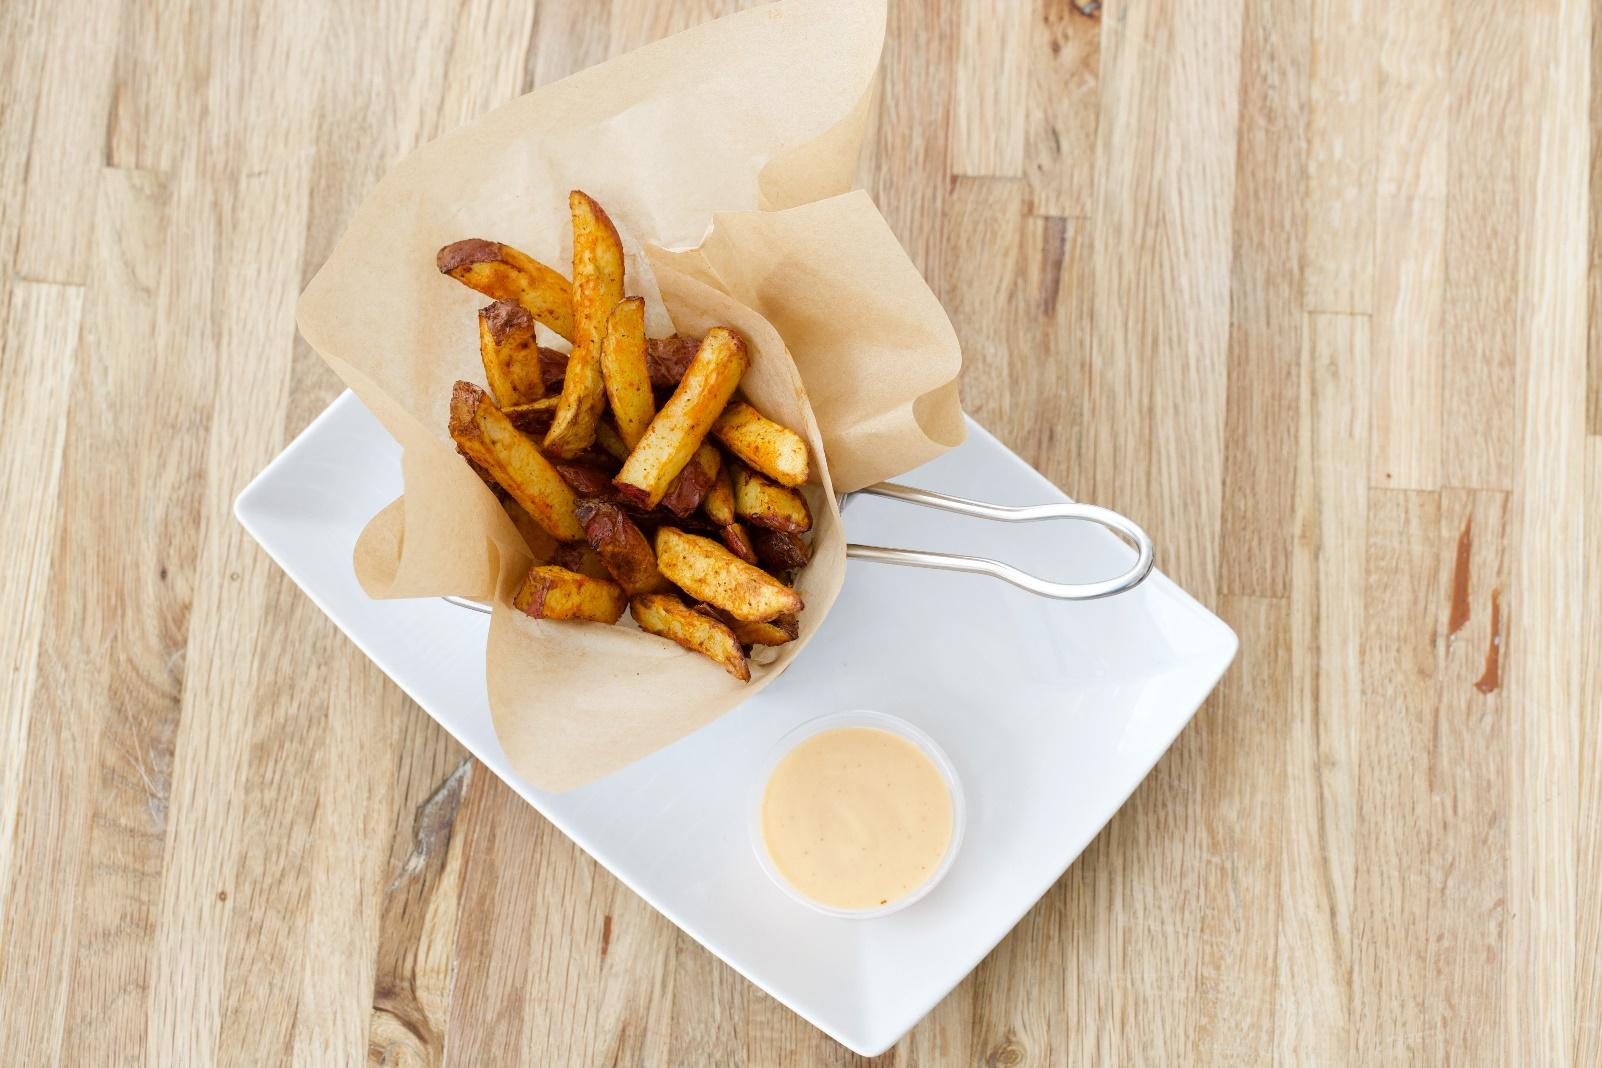 Crunch fries on a plate, The Real Food Academy Miami baked fries recipe.